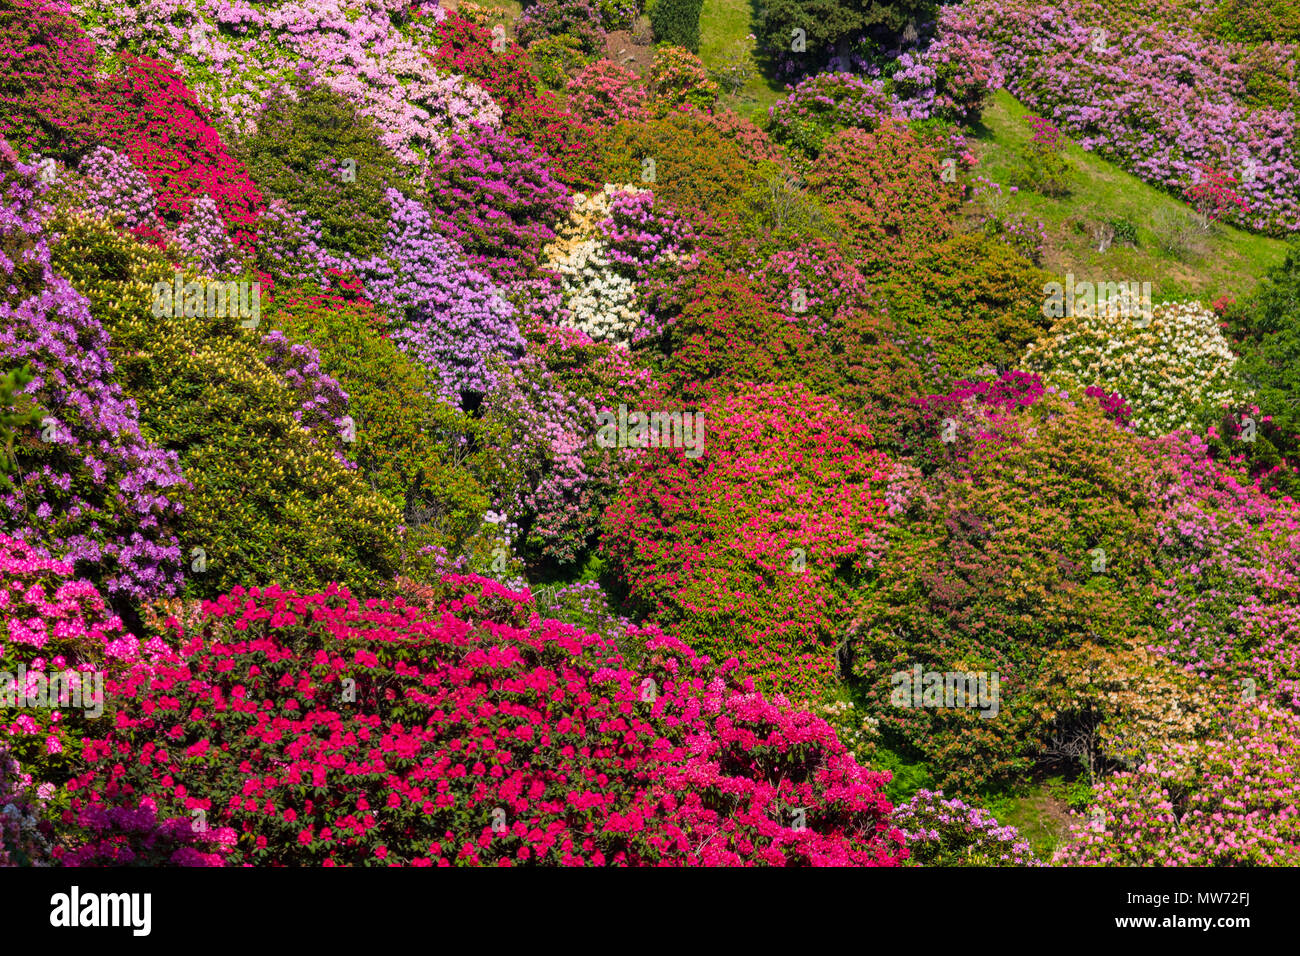 Beautiful rhododendron in National national Park located in Italy Stock Photo